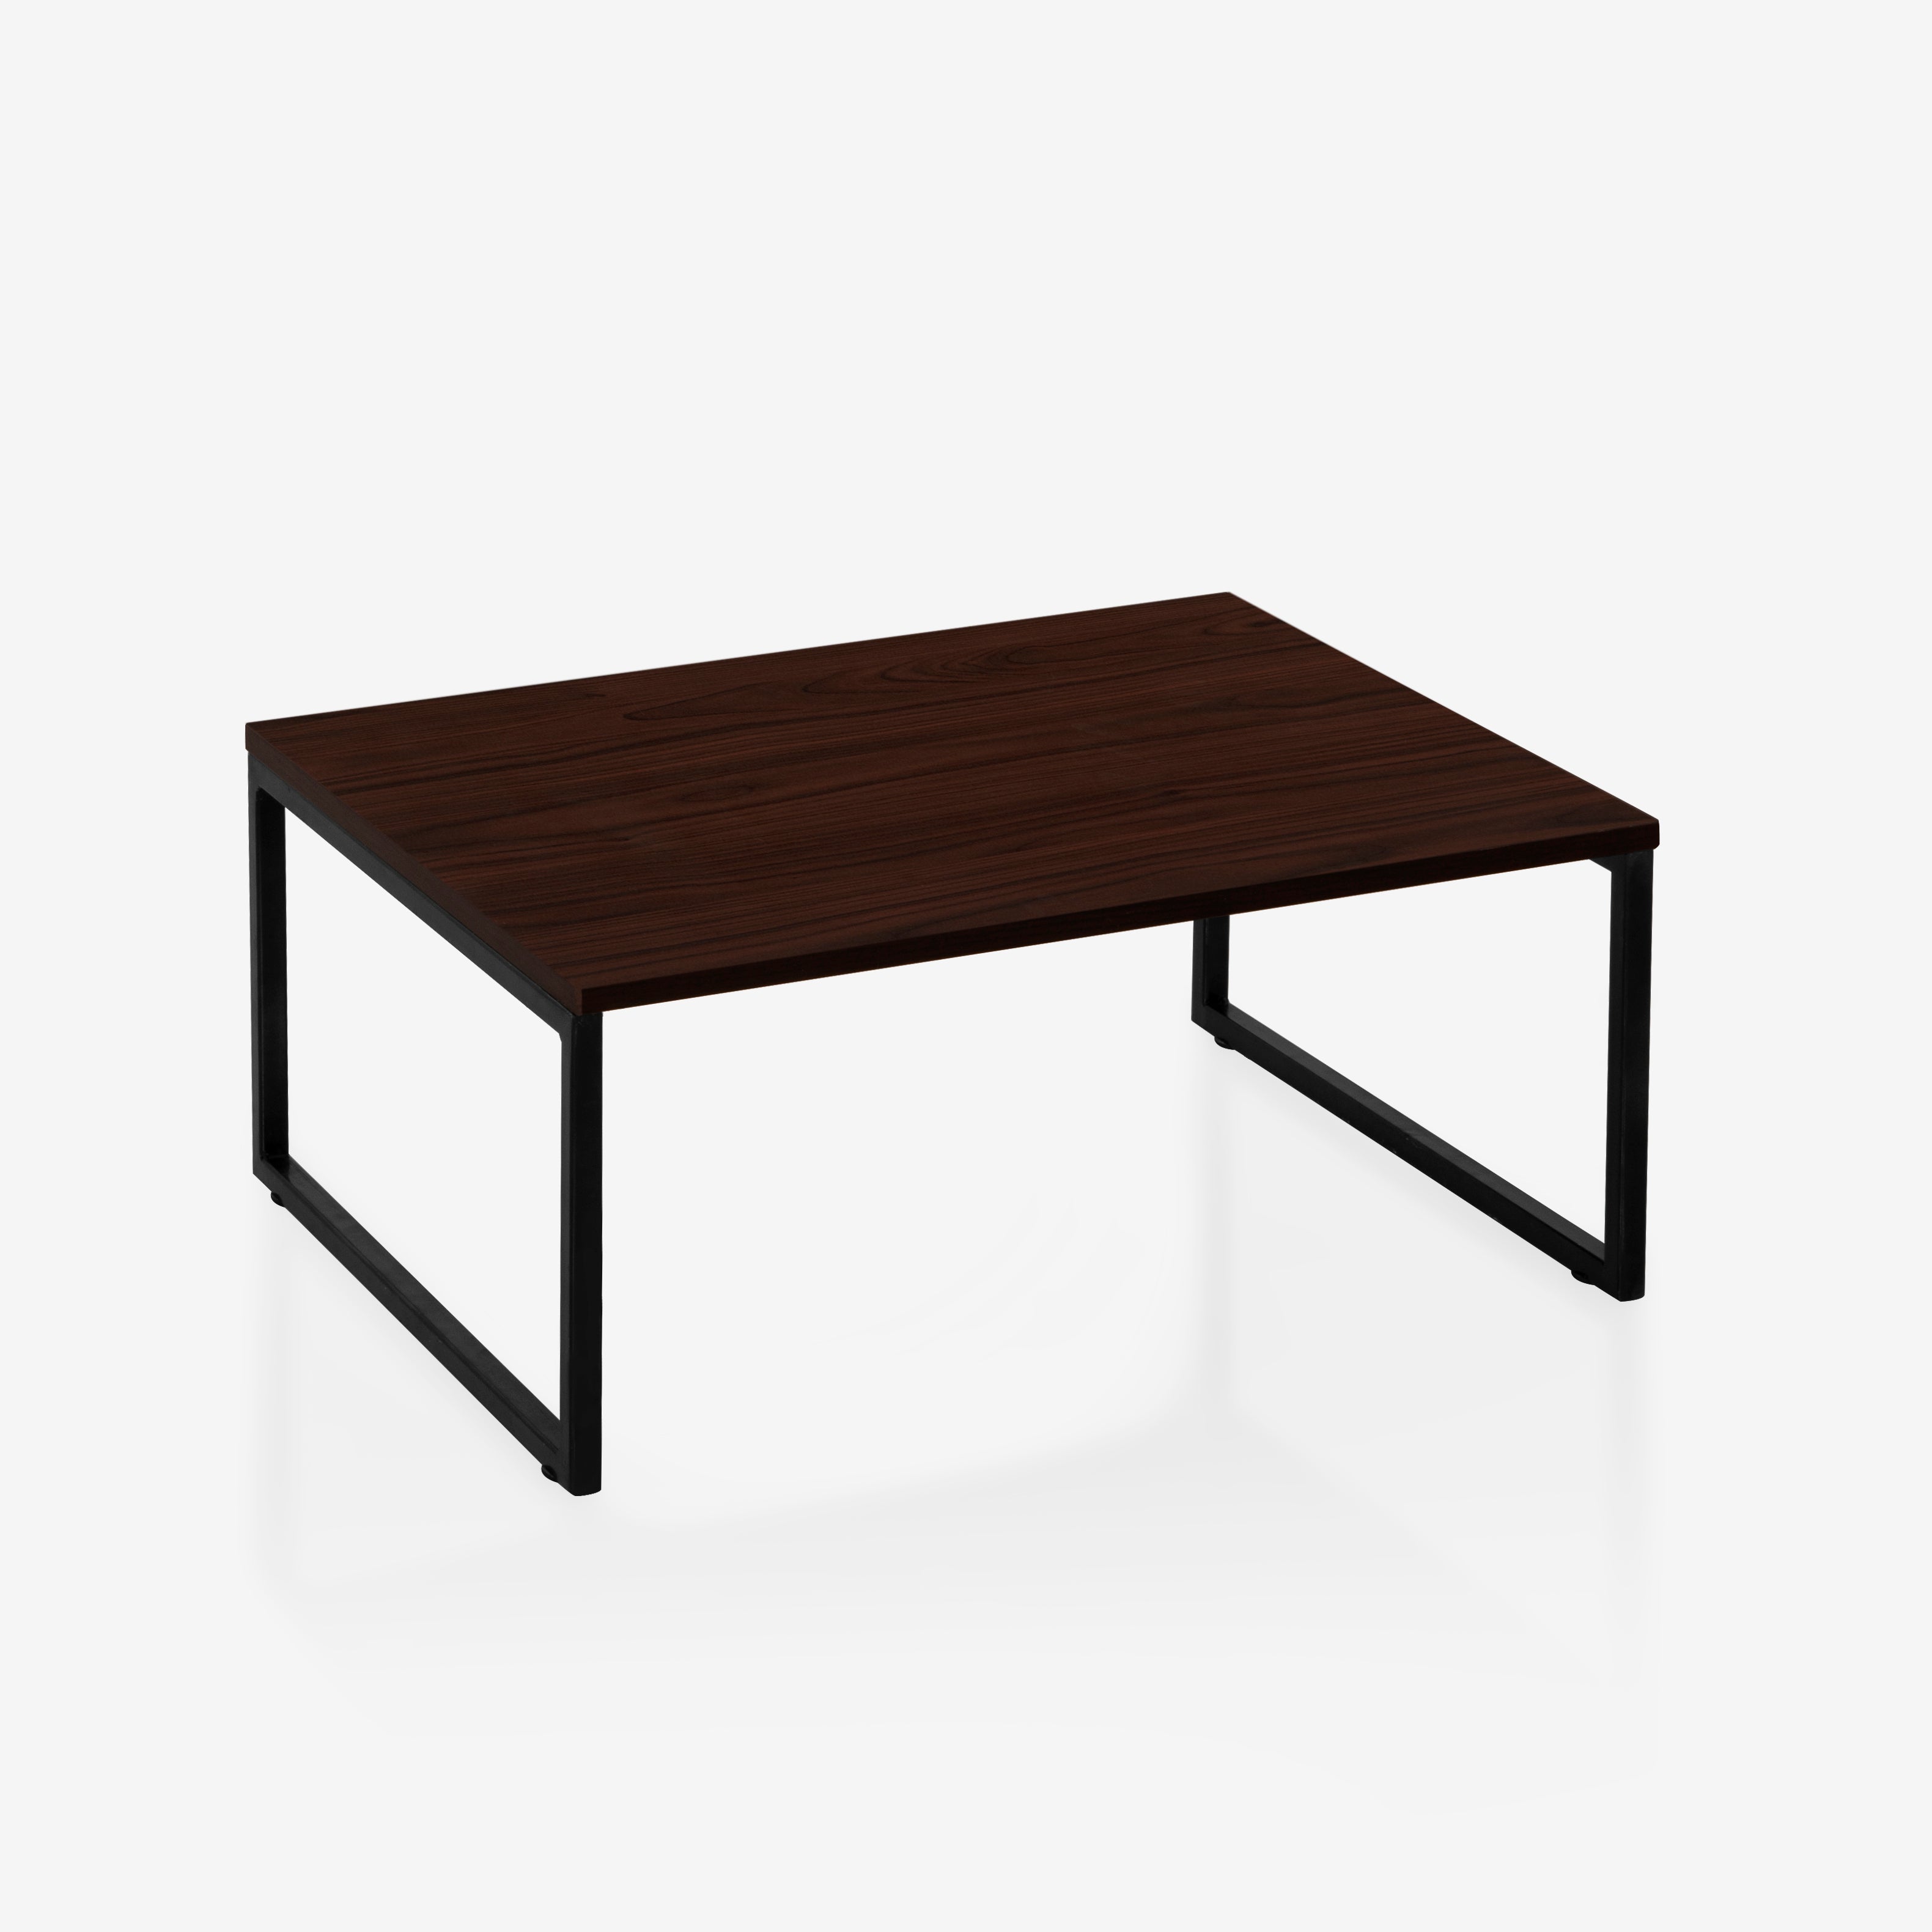 IB Floor Seating Desk Nested Table XL Rich Walnut (Deliver in 10 Days From Order Confirmation)-(1 Pc) LXBXH:860X420X70